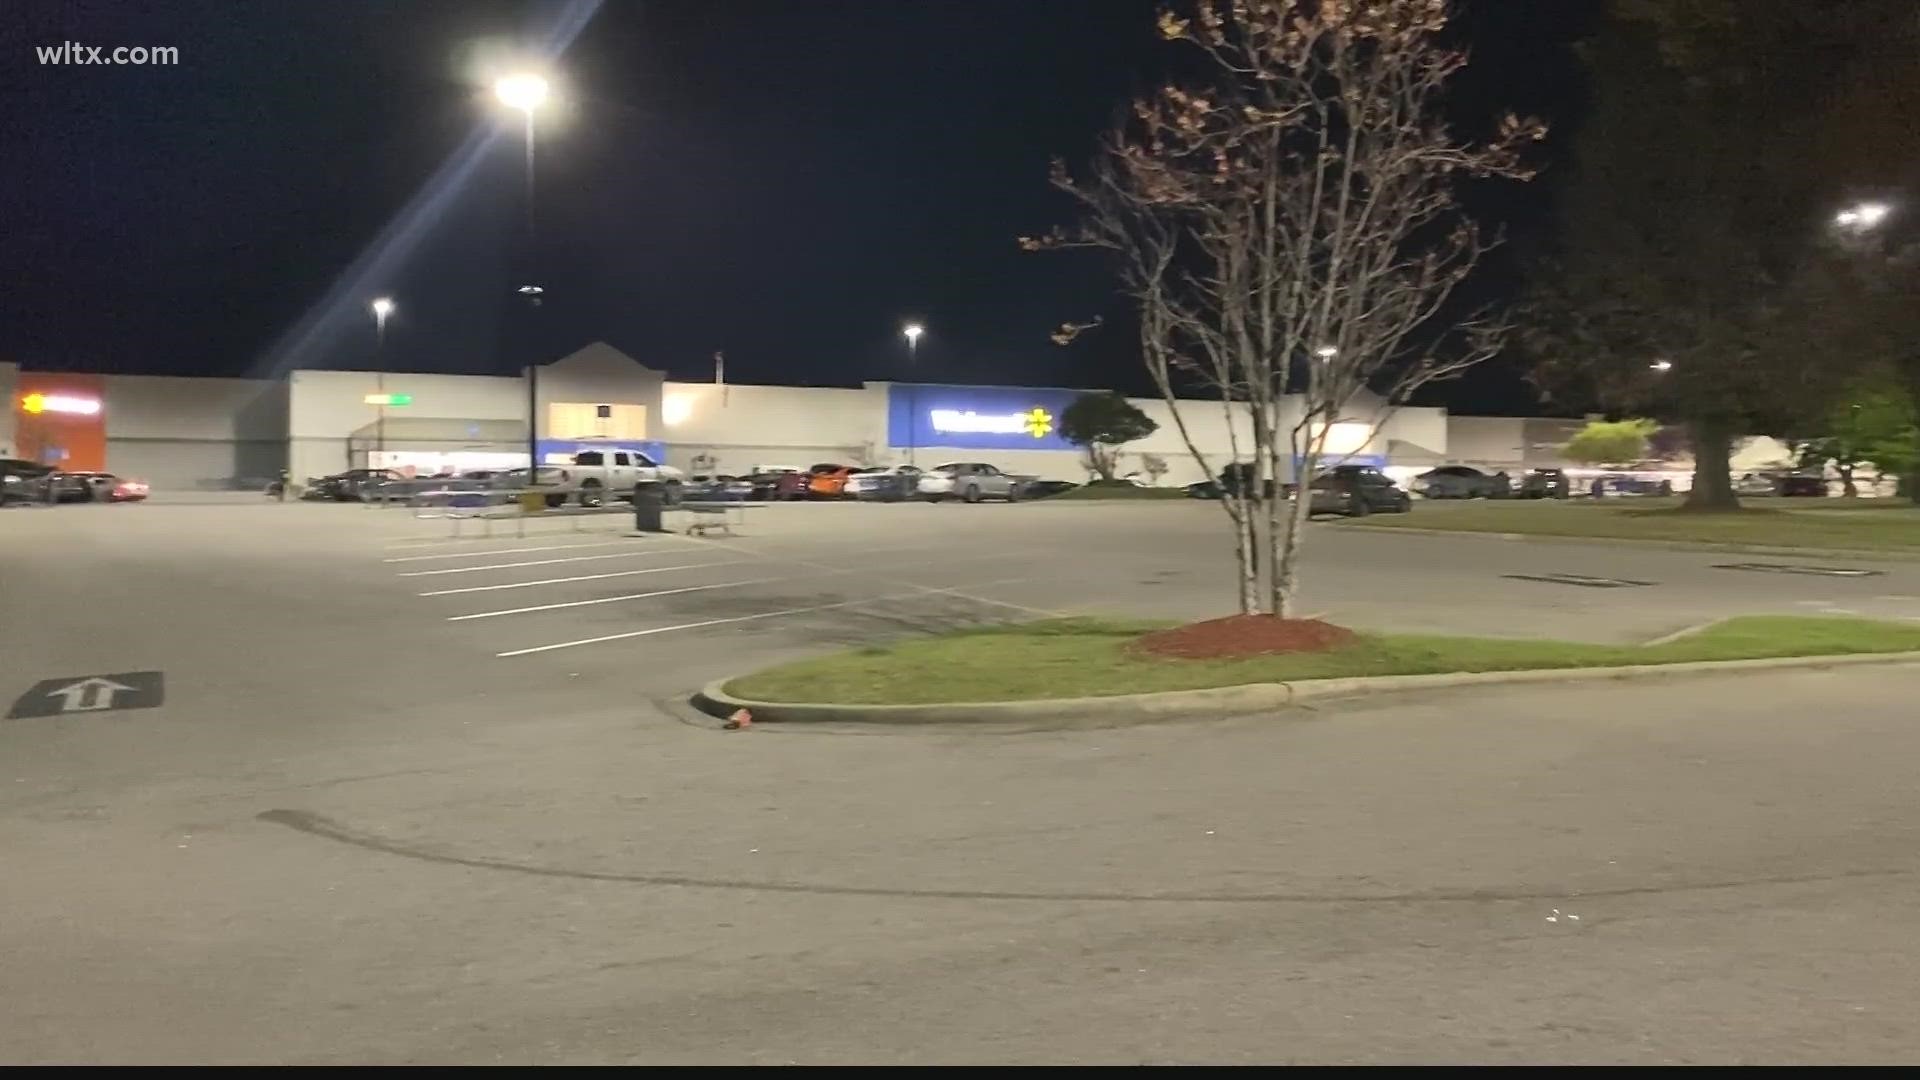 The shooting happened outside the Walmart on Garners Ferry road.